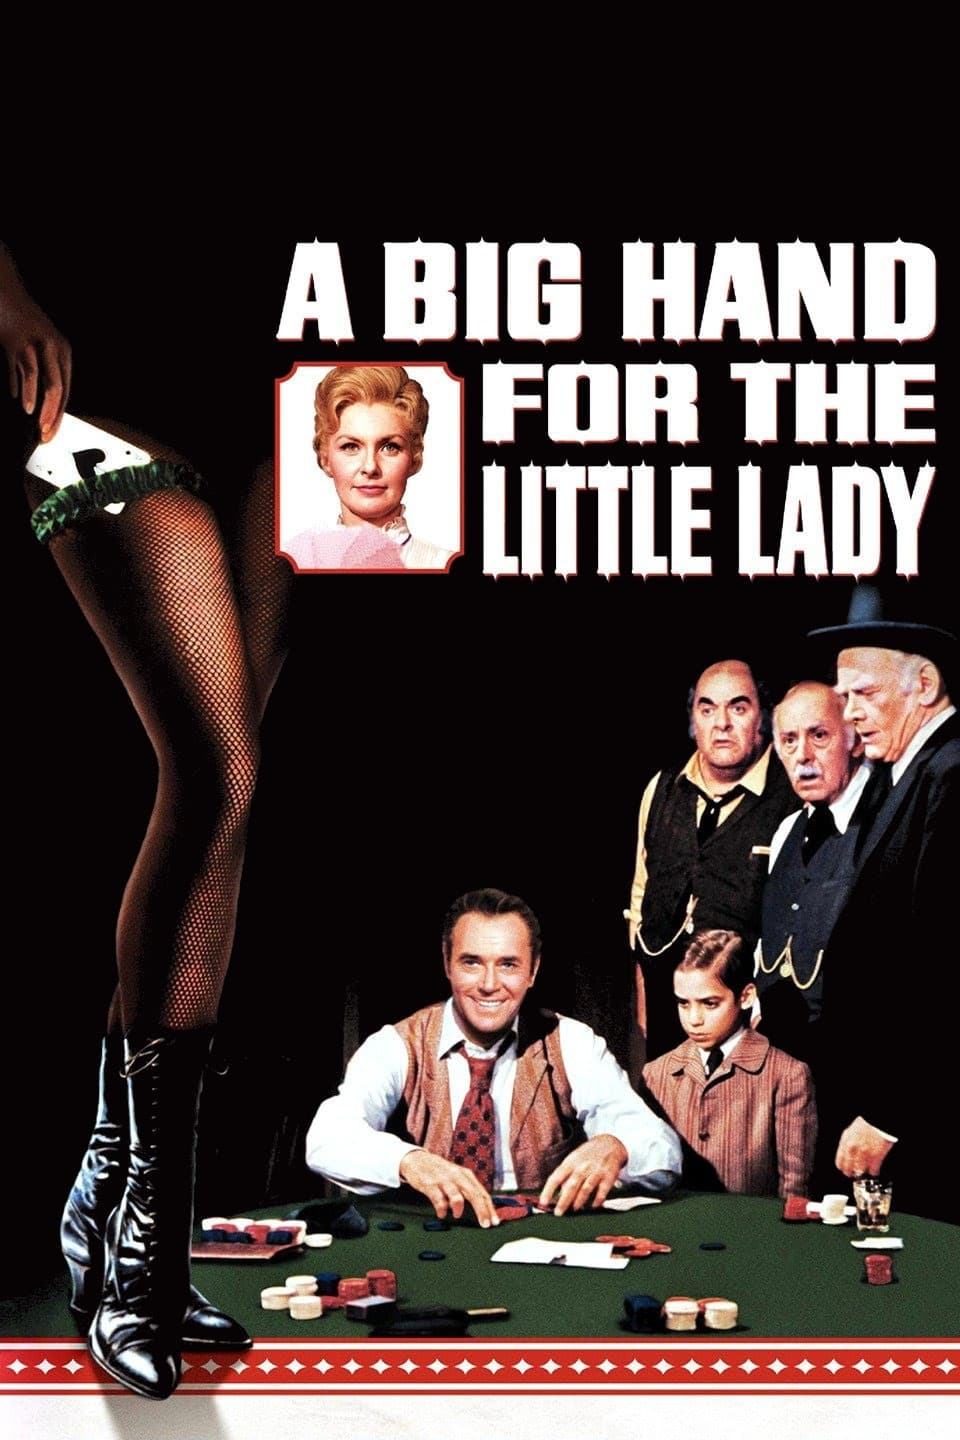 A Big Hand for the Little Lady (A Big Hand for the Little Lady) [1966]